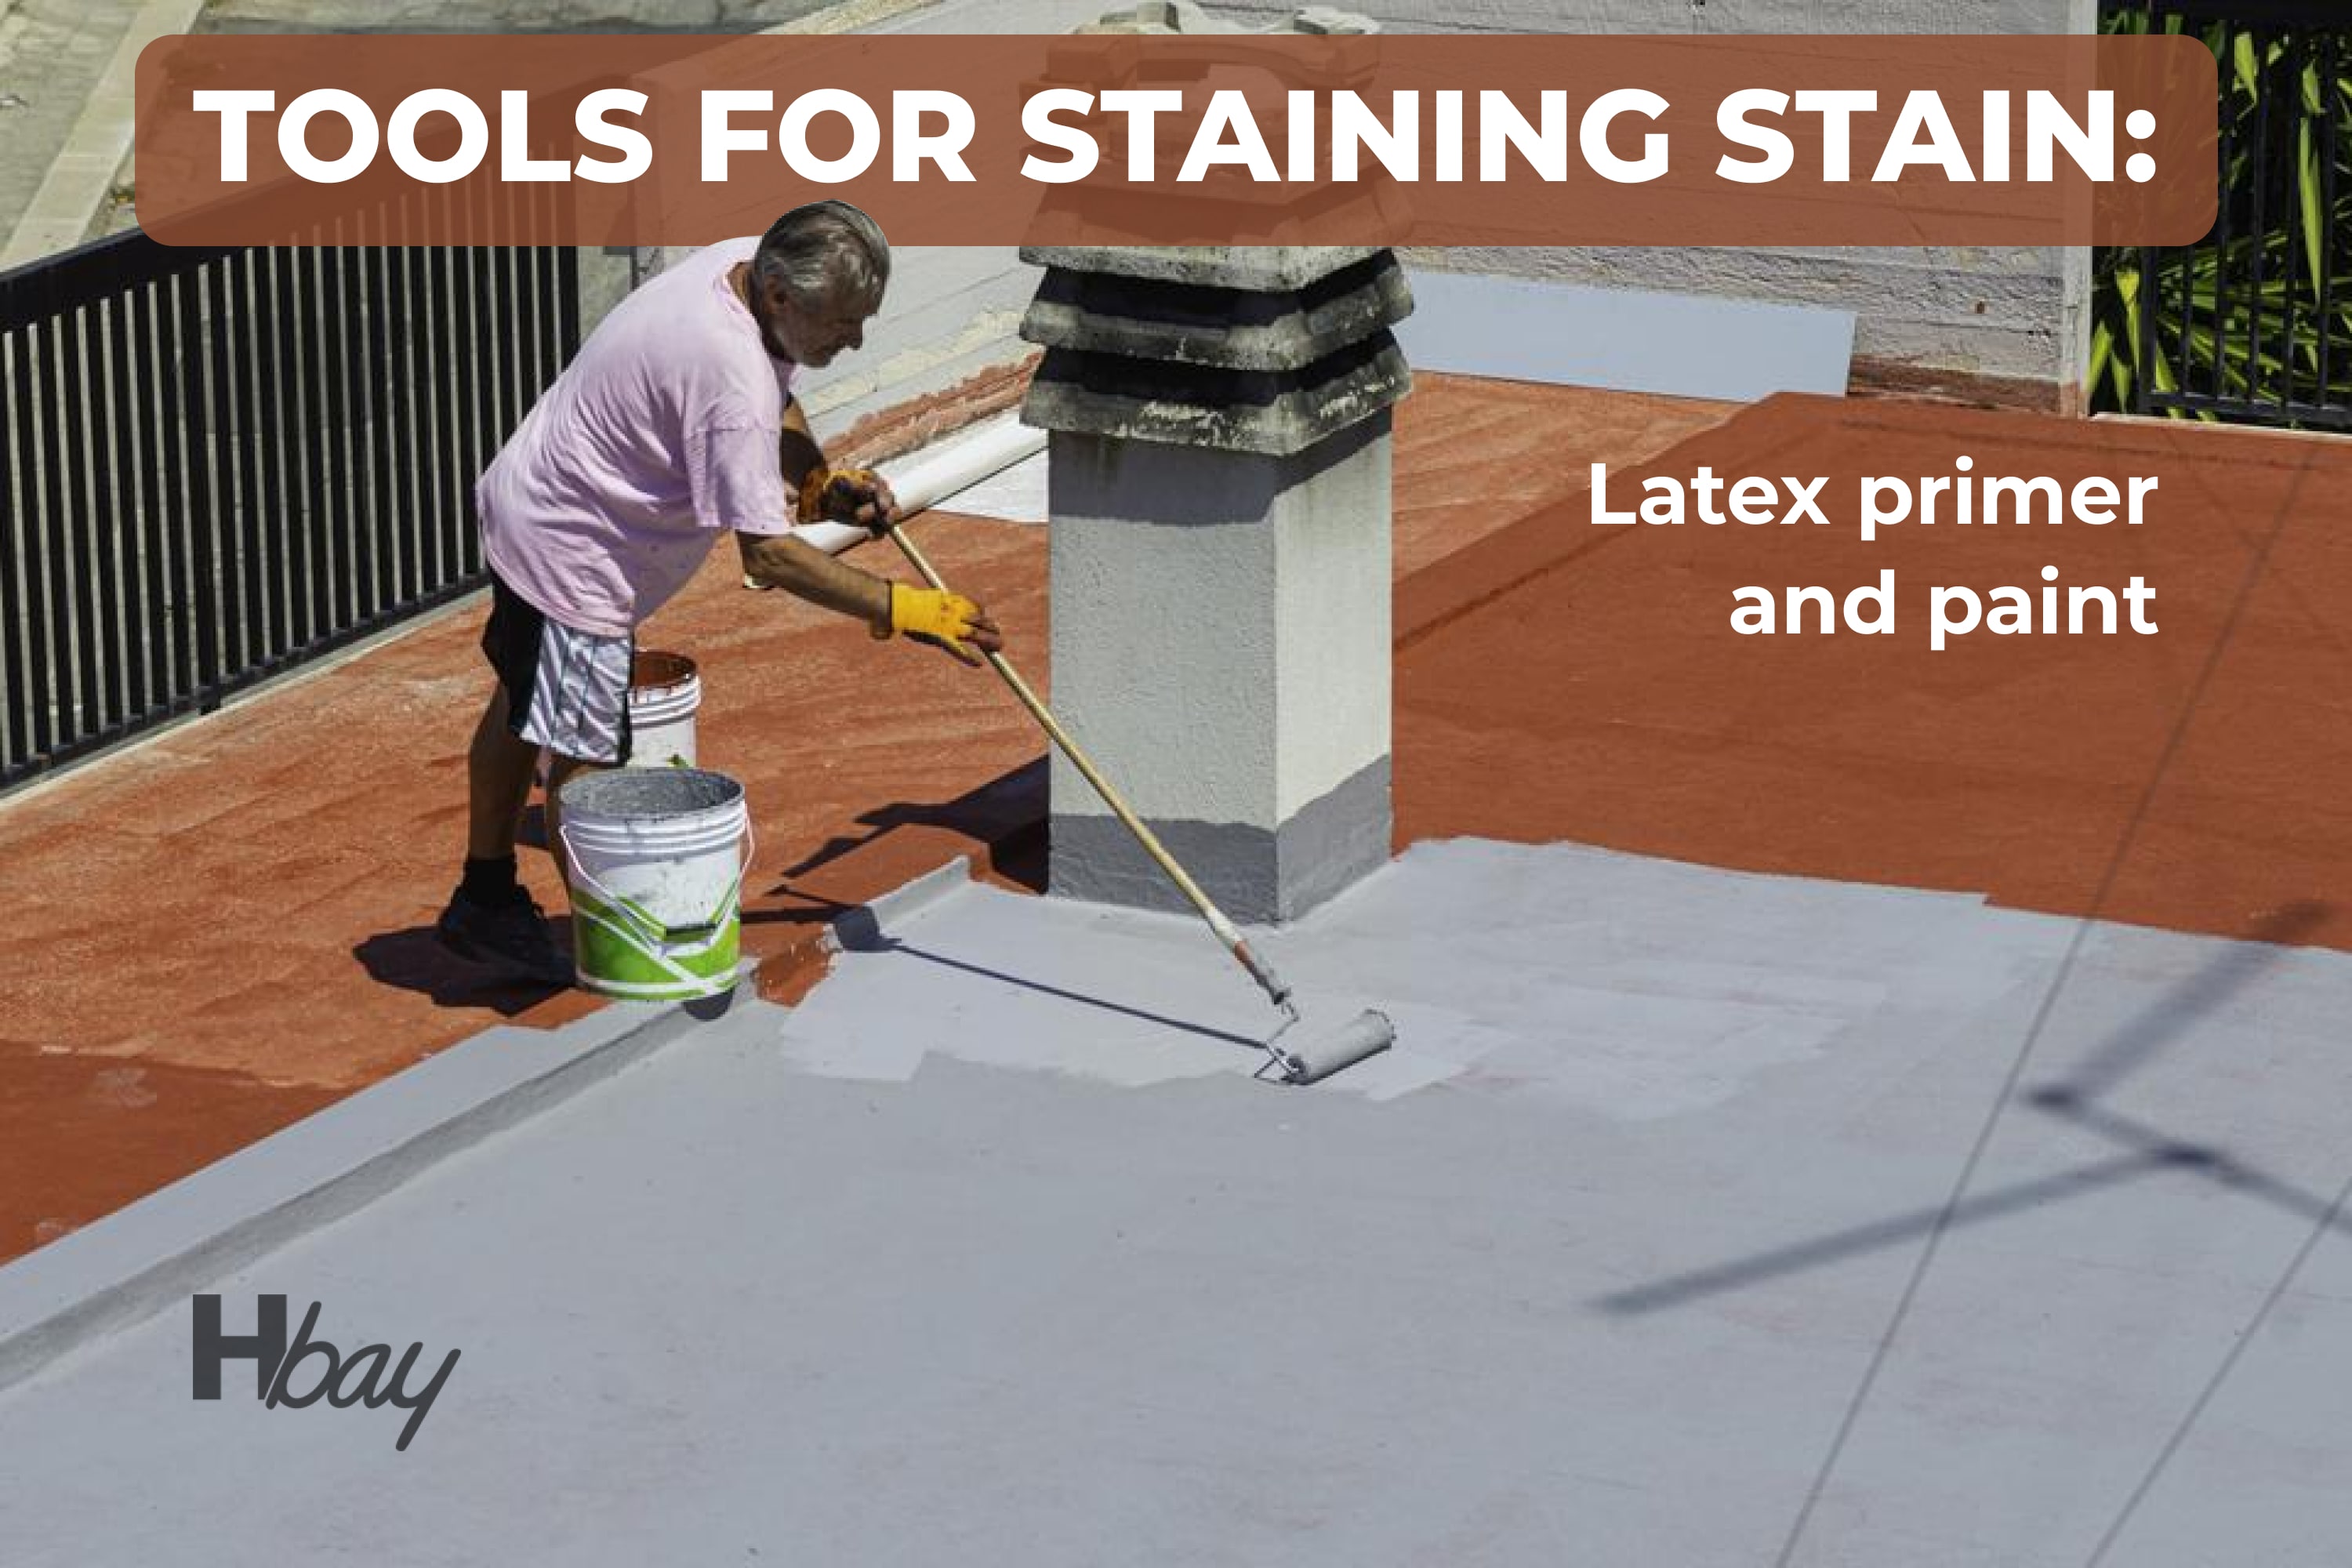 Tools for staining stain